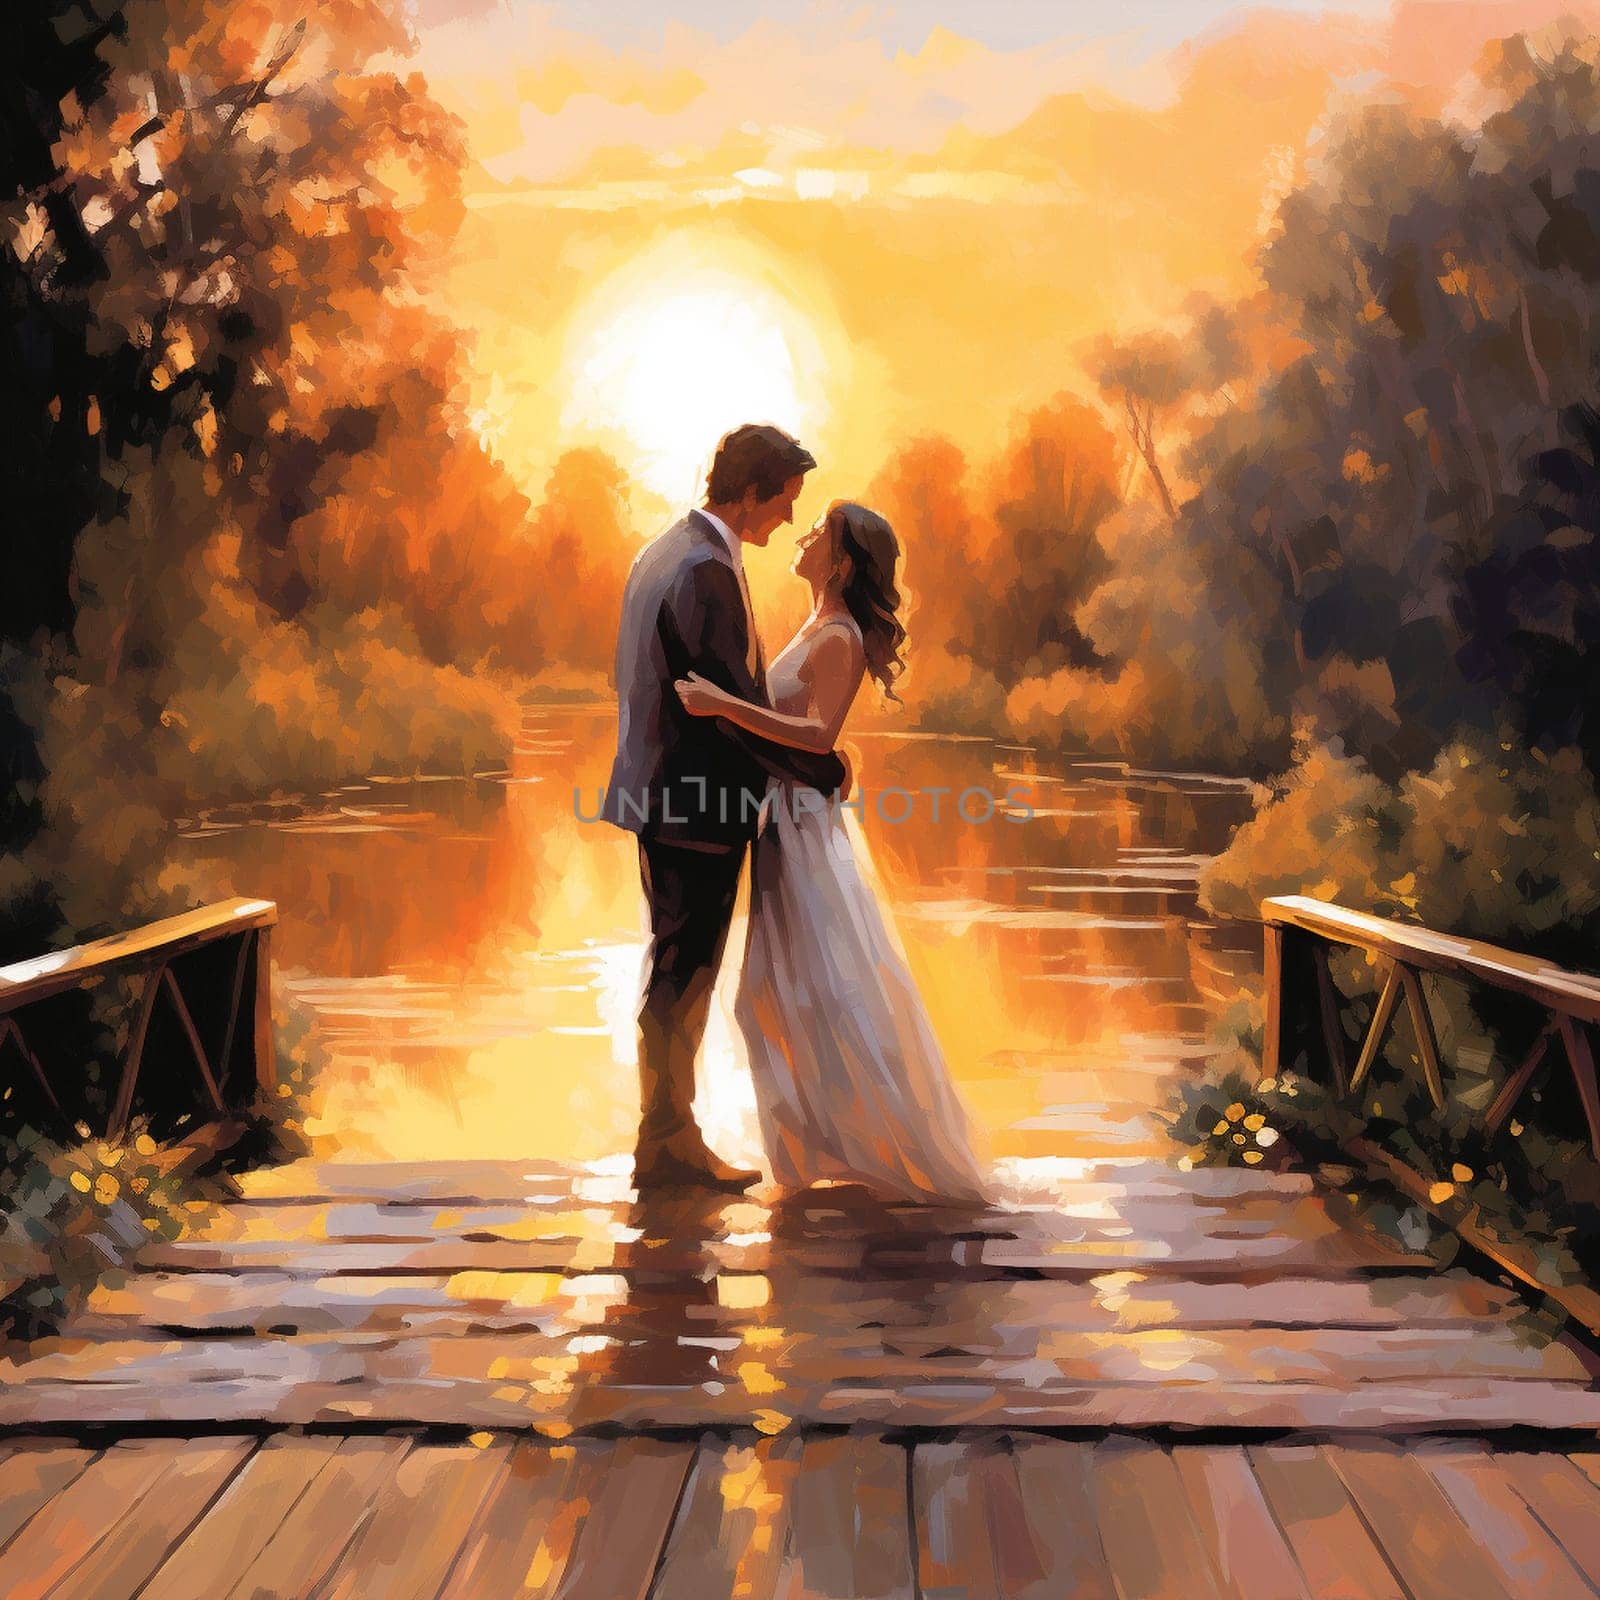 Experience a heartwarming moment as two individuals stand on a rustic bridge at sunset, exchanging heartfelt vows that will bind them together for eternity. The bridge is adorned with blooming flowers and lush greenery, illuminated by rays of golden sunlight, creating a mesmerizing and peaceful ambiance. This image captures the beauty of love, commitment, and the beginning of a lifelong journey. It evokes emotions and inspires viewers seeking images related to vows, romance, and everlasting love. The vibrant colors, soft brushstrokes, and touch of dreaminess in the art style make this image captivating and sought-after on microstock sites.